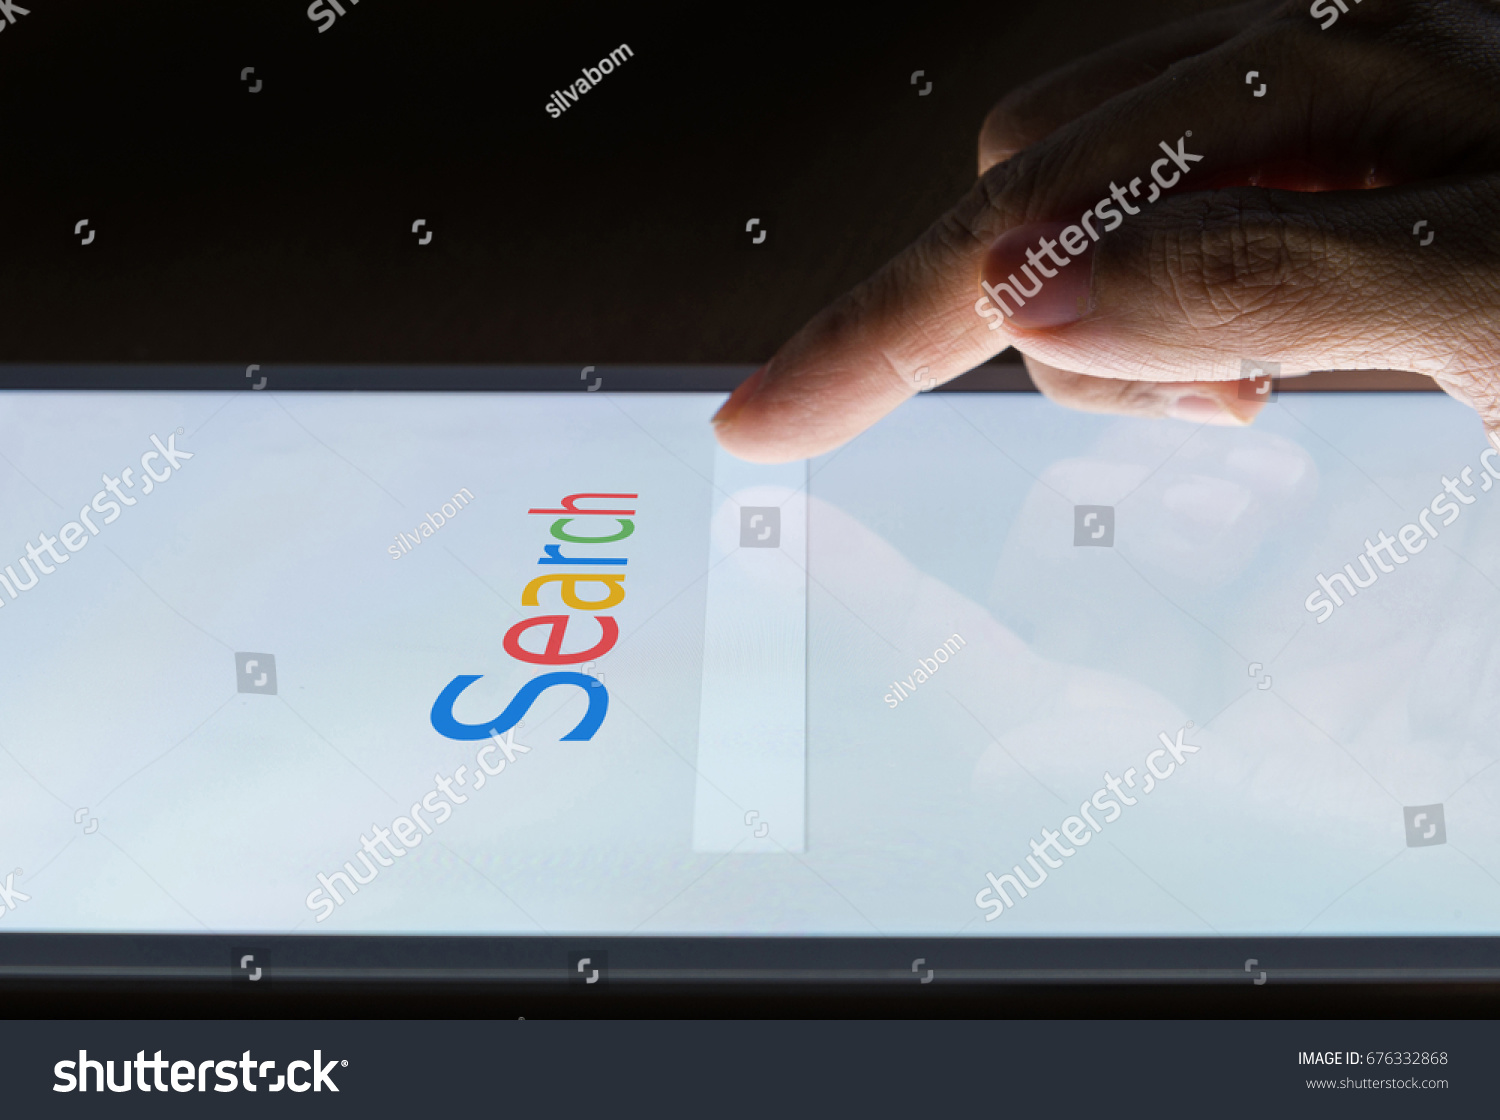 Search on internet search engine web on smart phone or tablet concept with night background #676332868